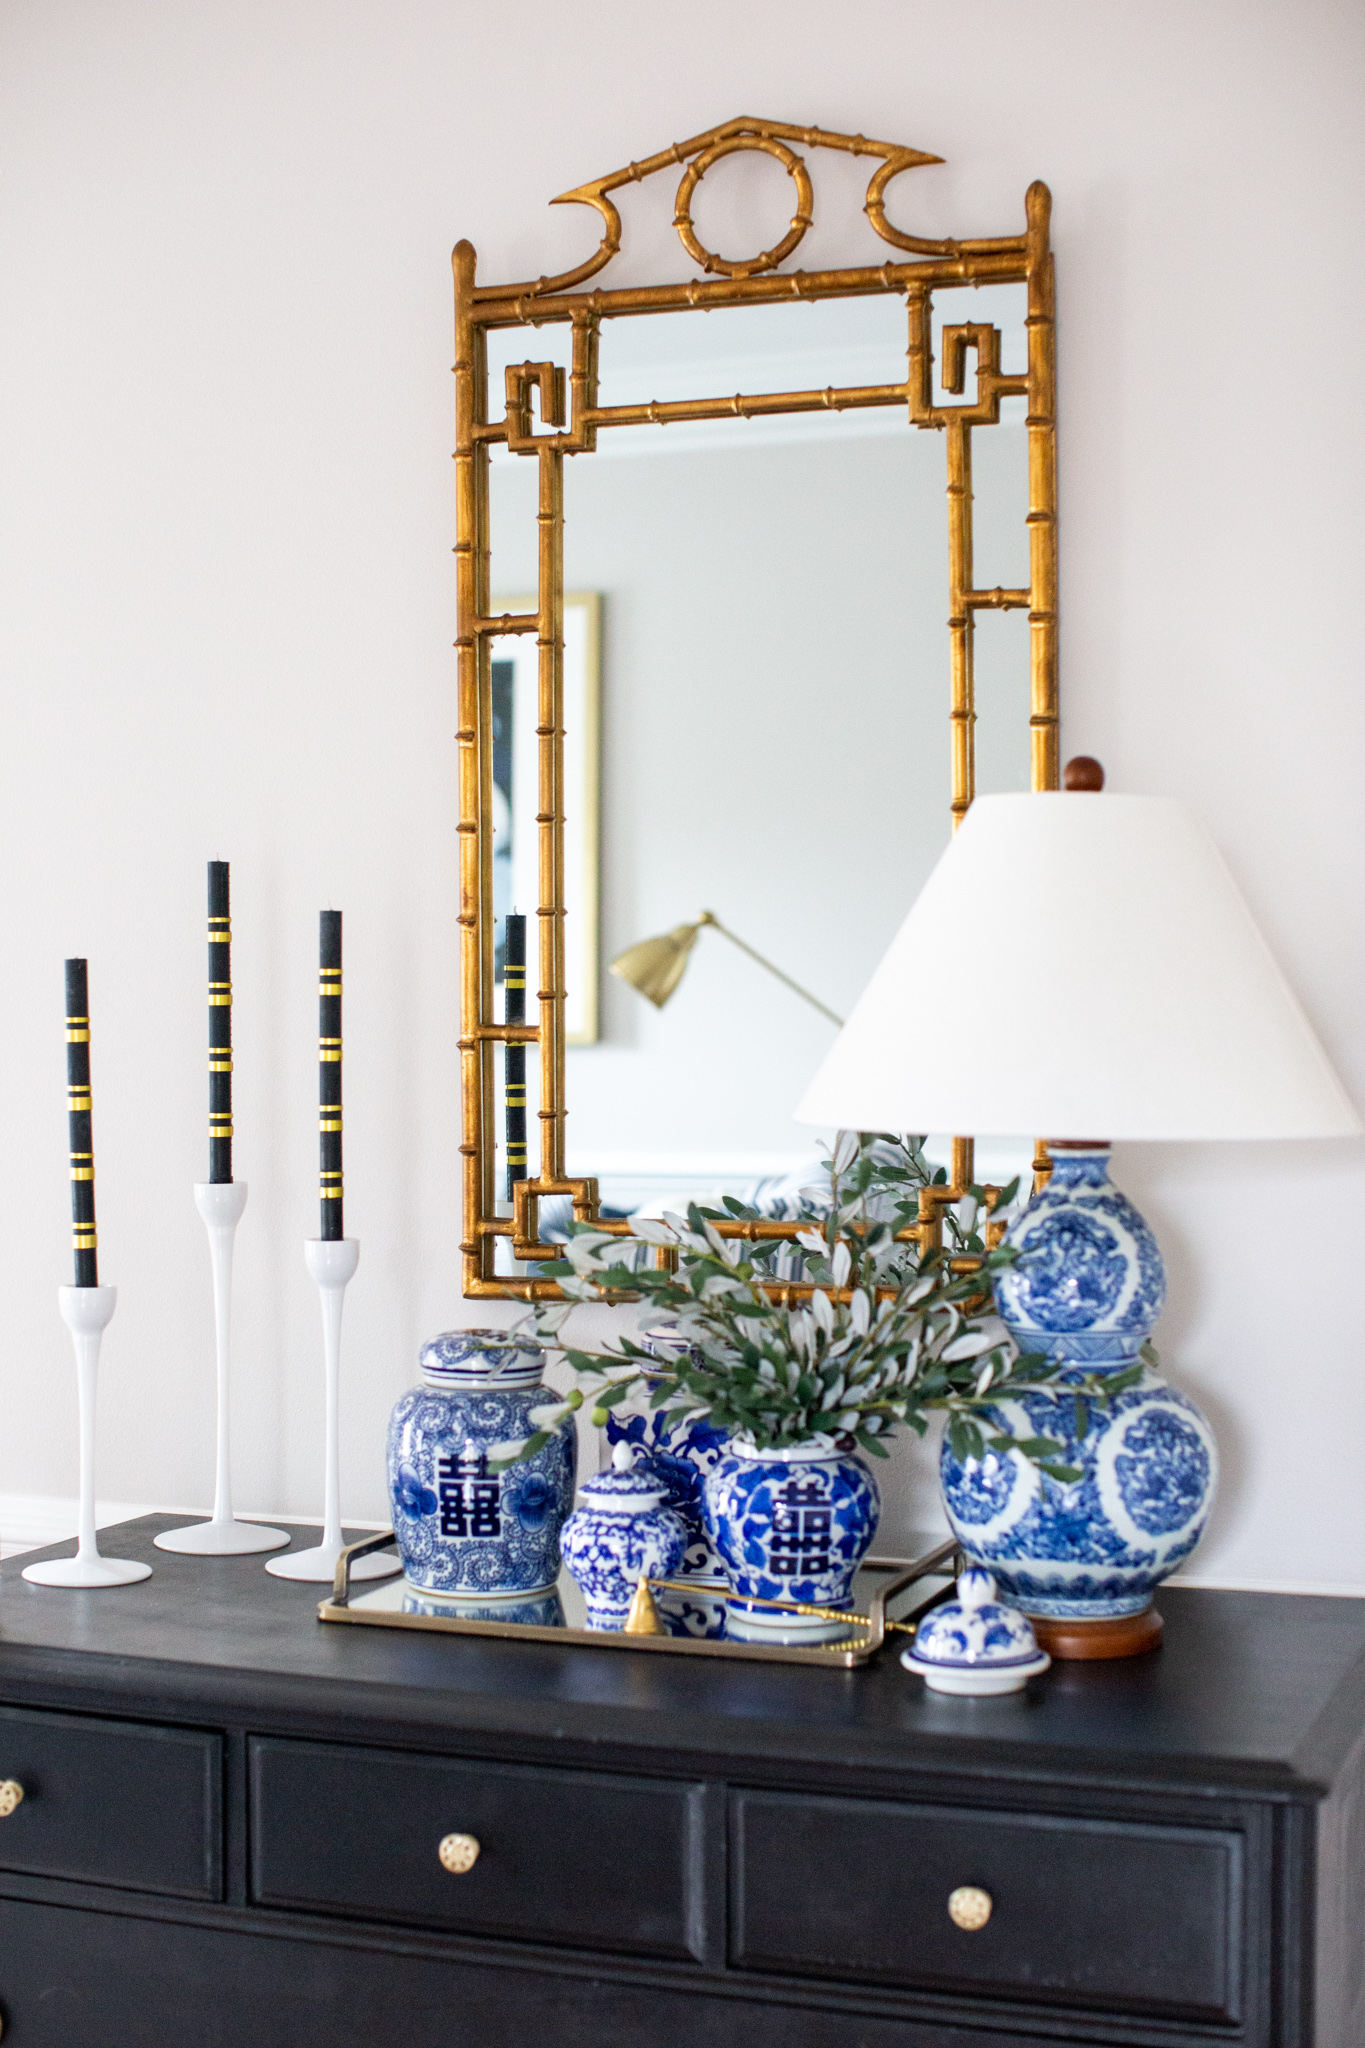 Mixing Old and New Furniture by popular Ohio life and style blog, Coffee Beans and Bobby Pins: image of a vintage blue and white ginger jars, white Ikea candlesticks, black dresser, and bamboo mirror.